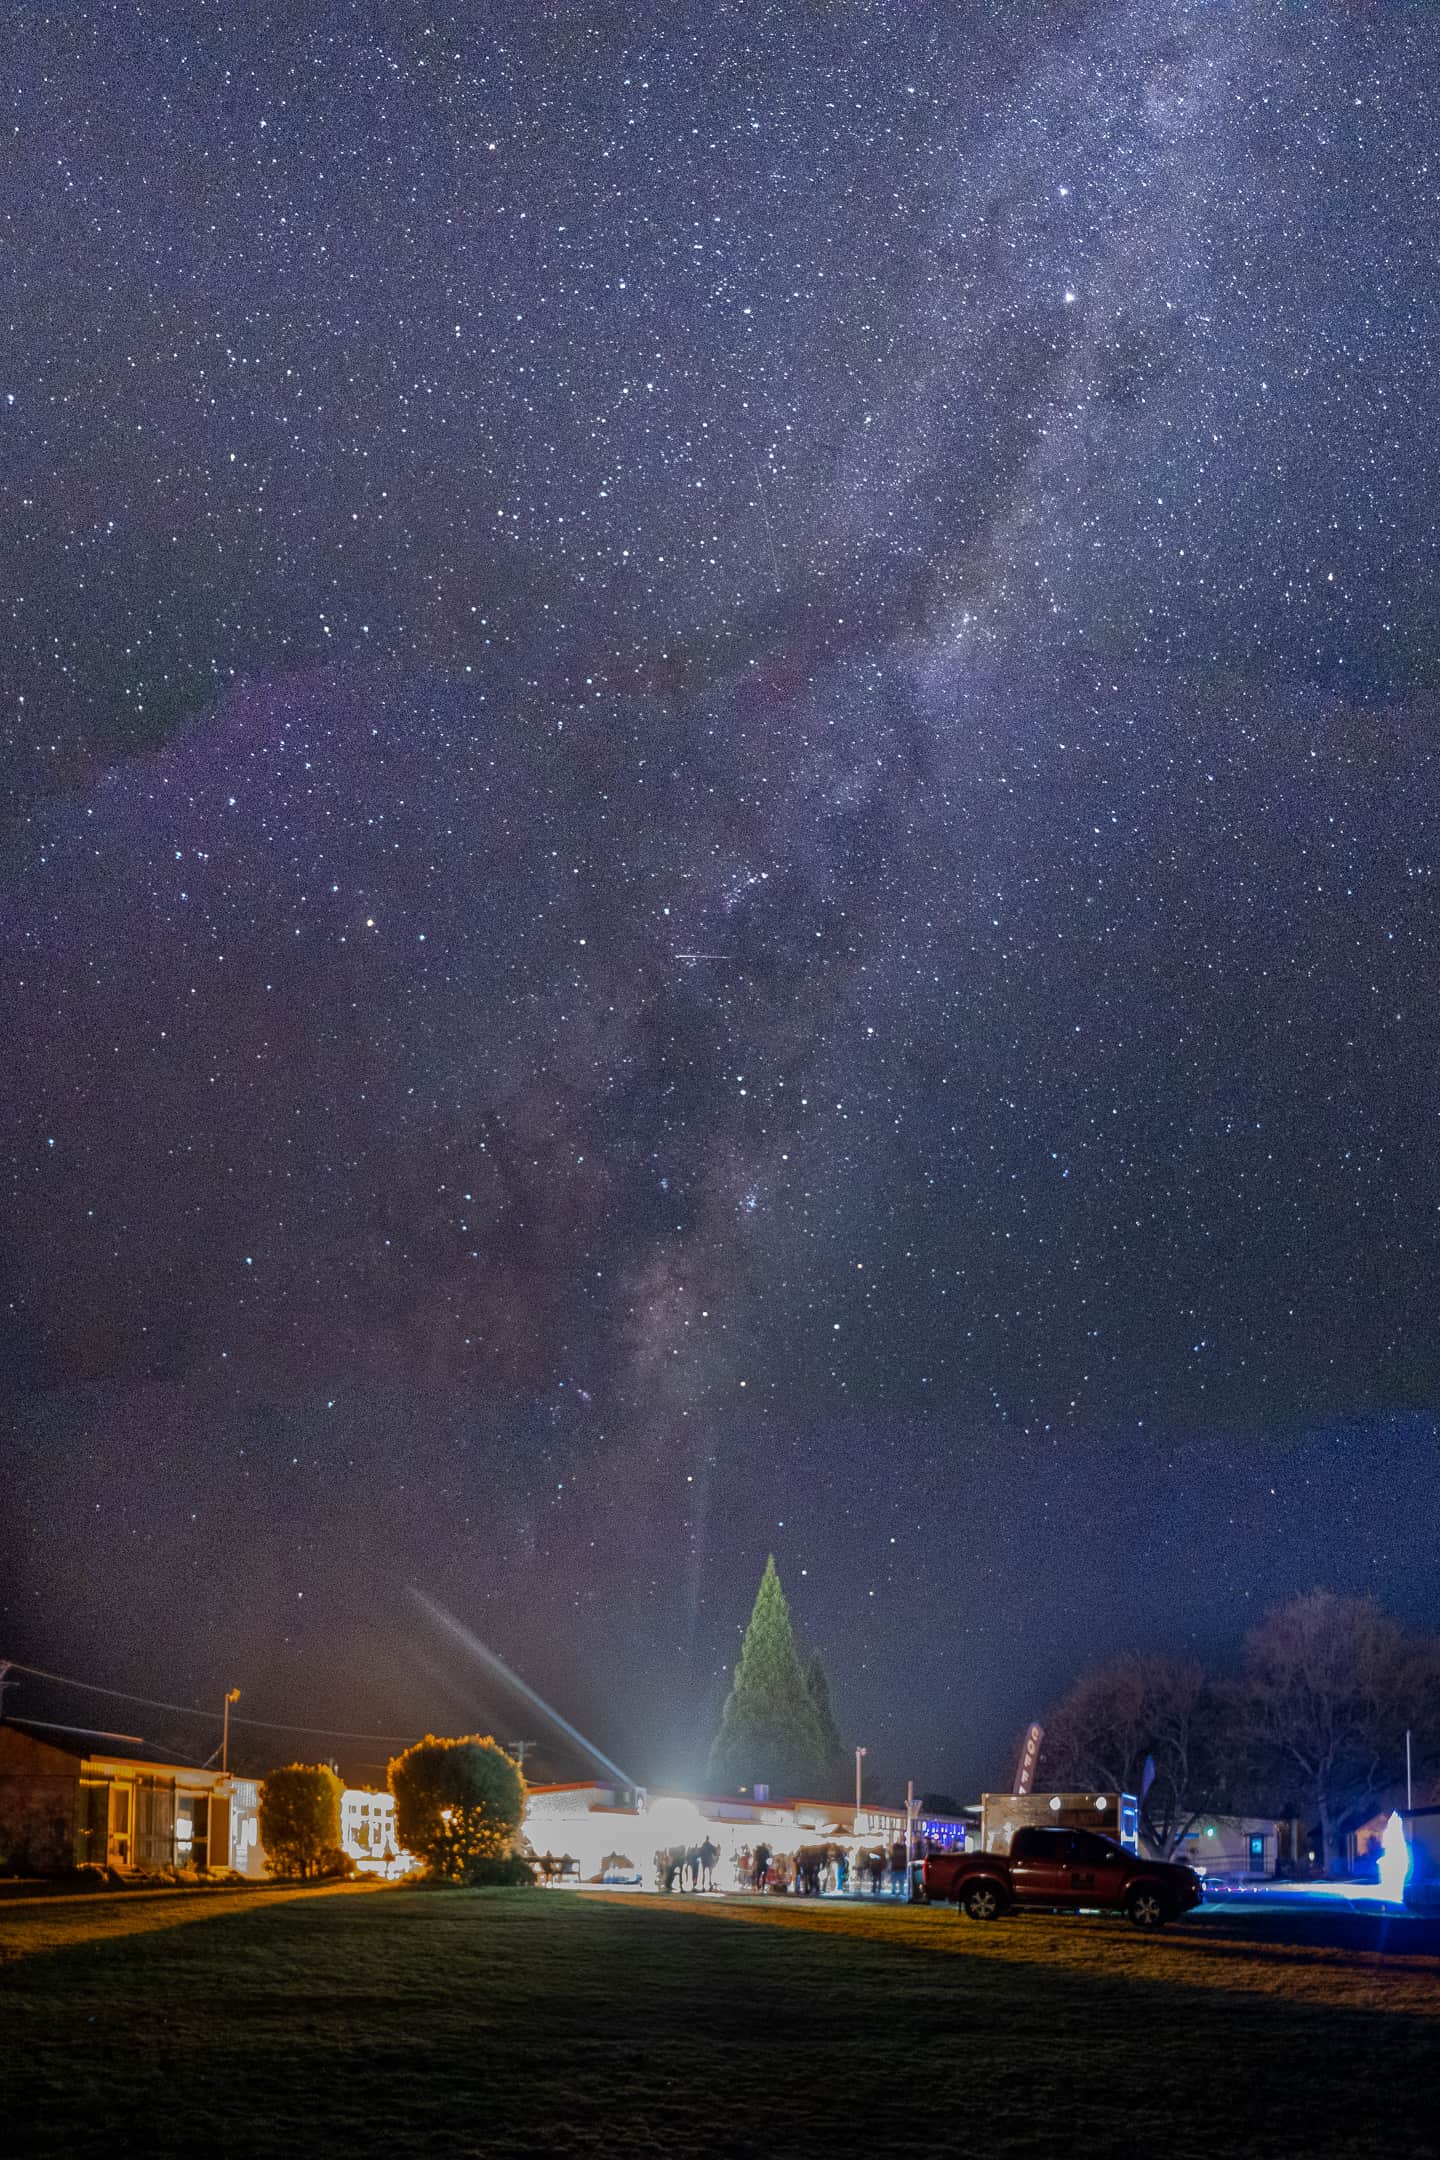 Milky Way standing over crowds gathering for the Clyde School Matariki celebration